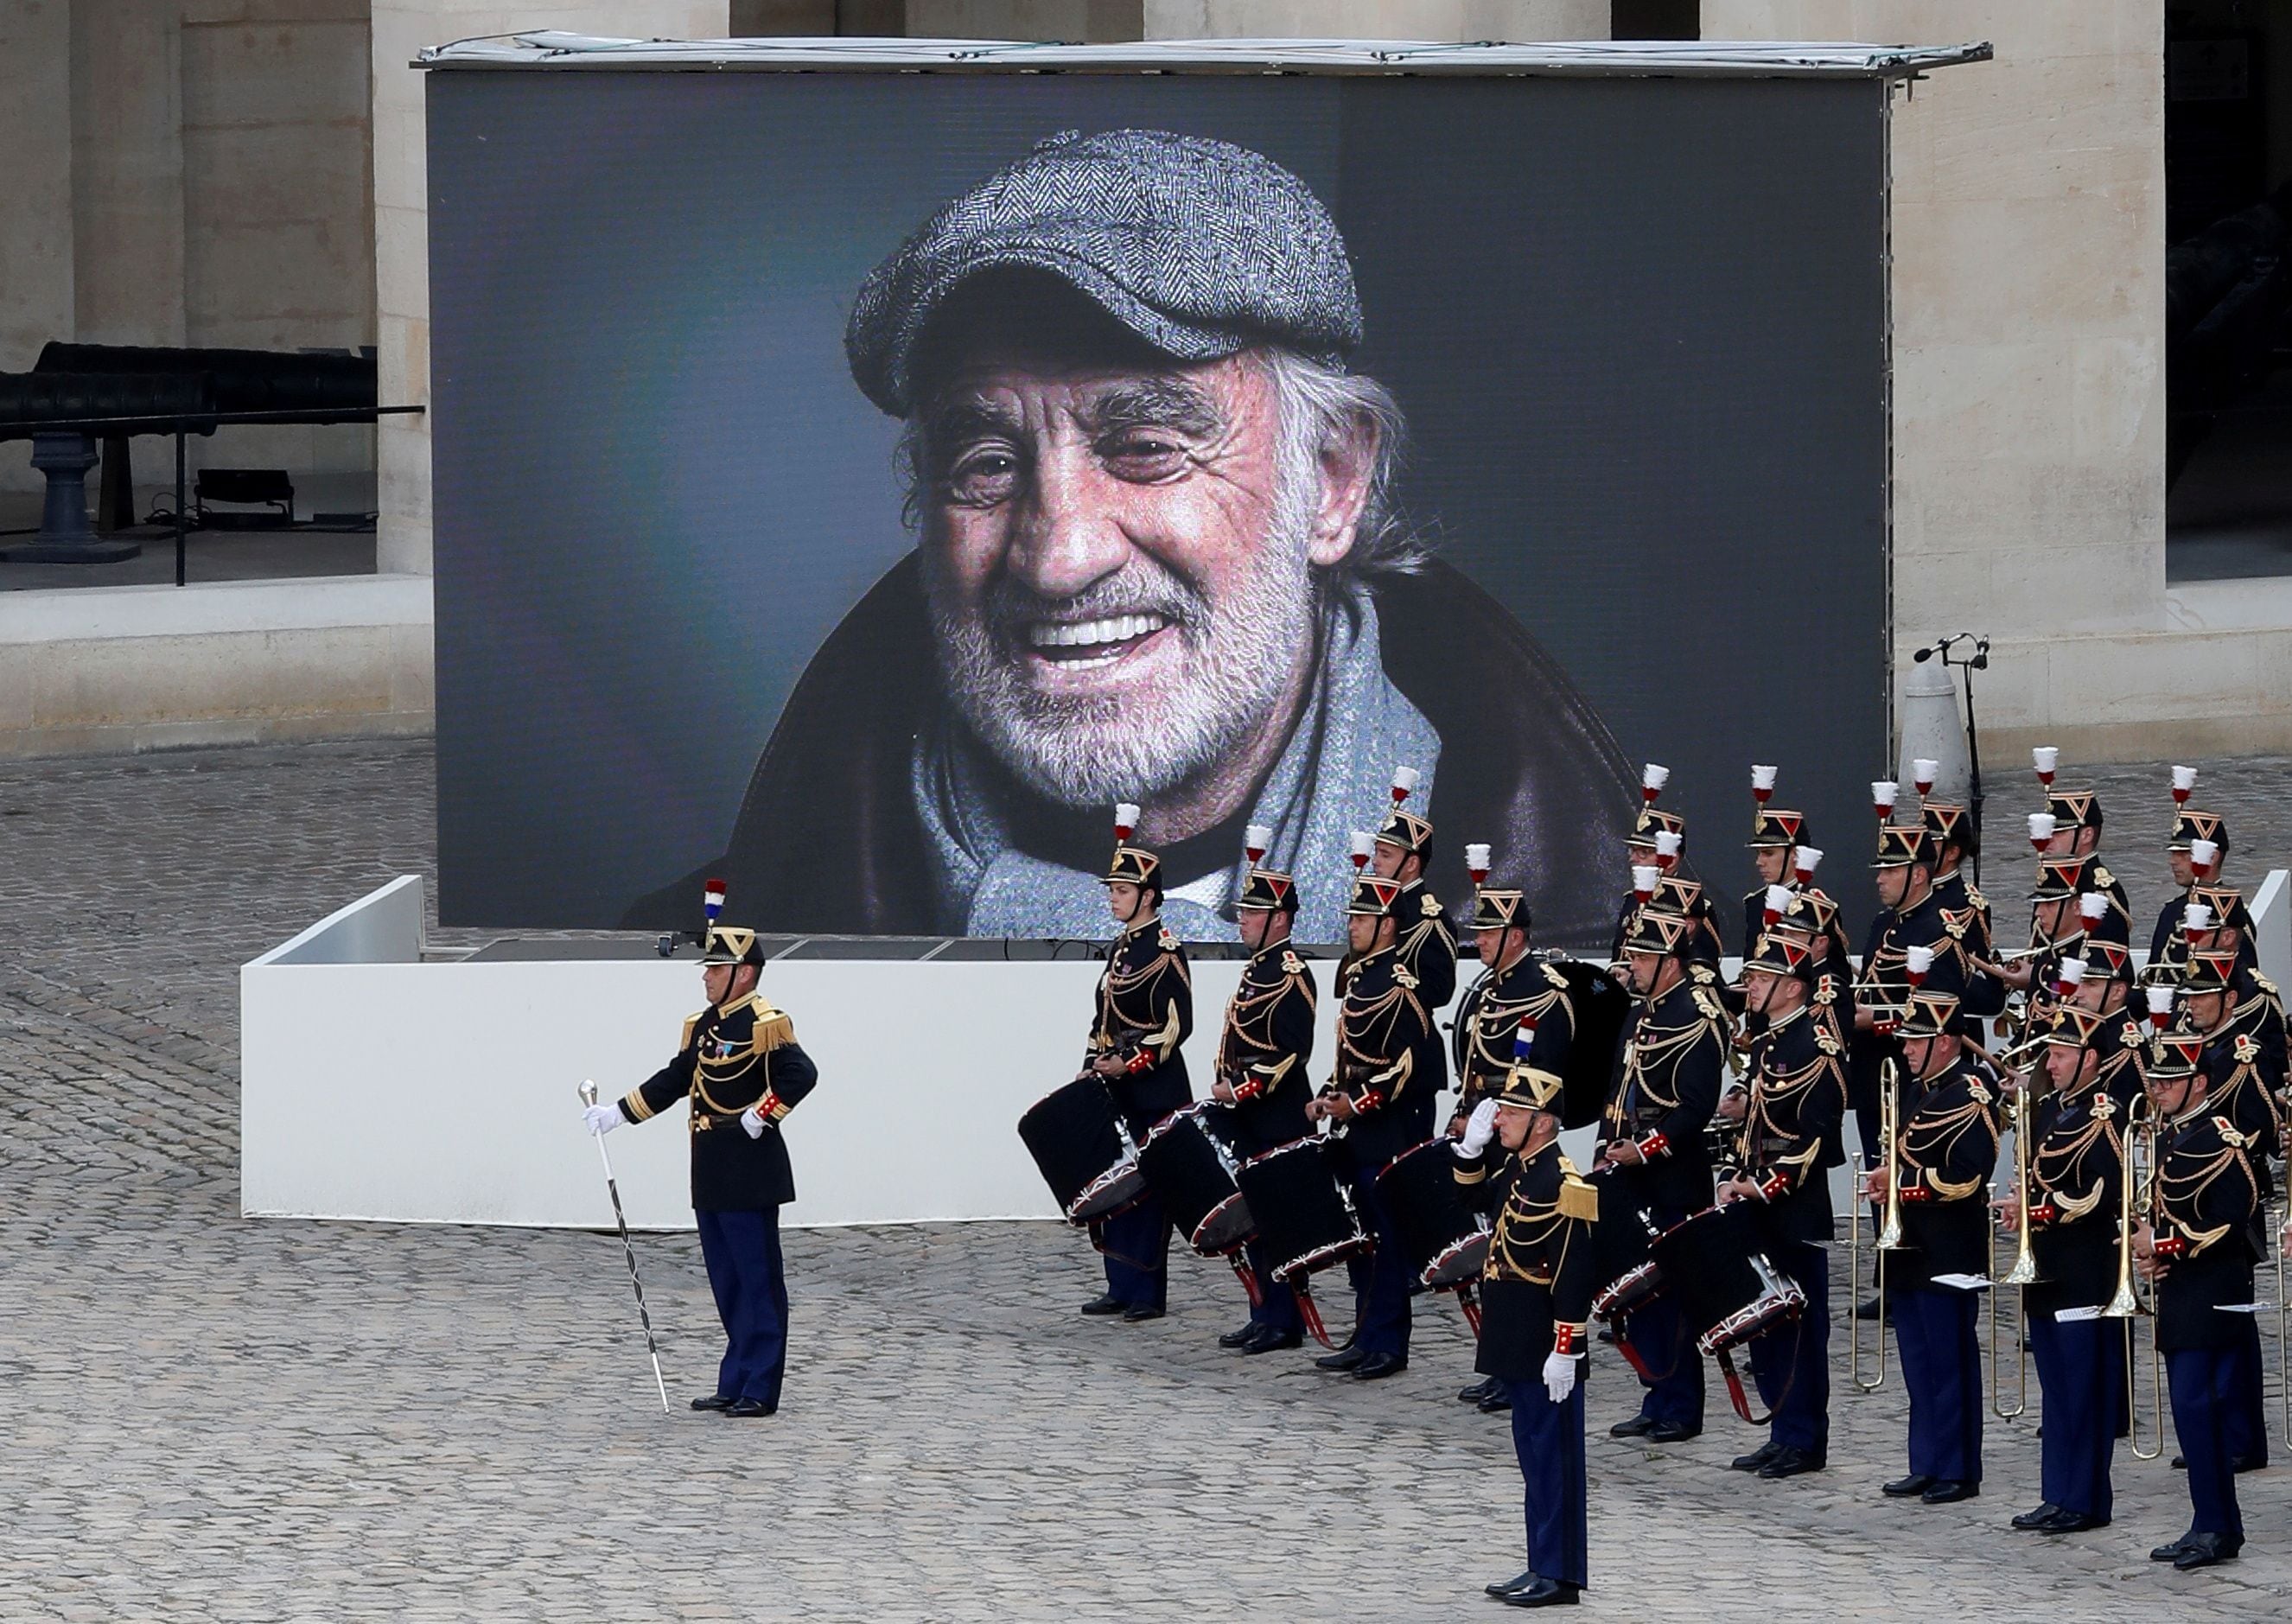 A photograph of the late actor Jean-Paul Belmondo is seen on a giant screen during a ceremony at the Hotel des Invalides in Paris, France, September 9, 2021. REUTERS/Eric Gaillard